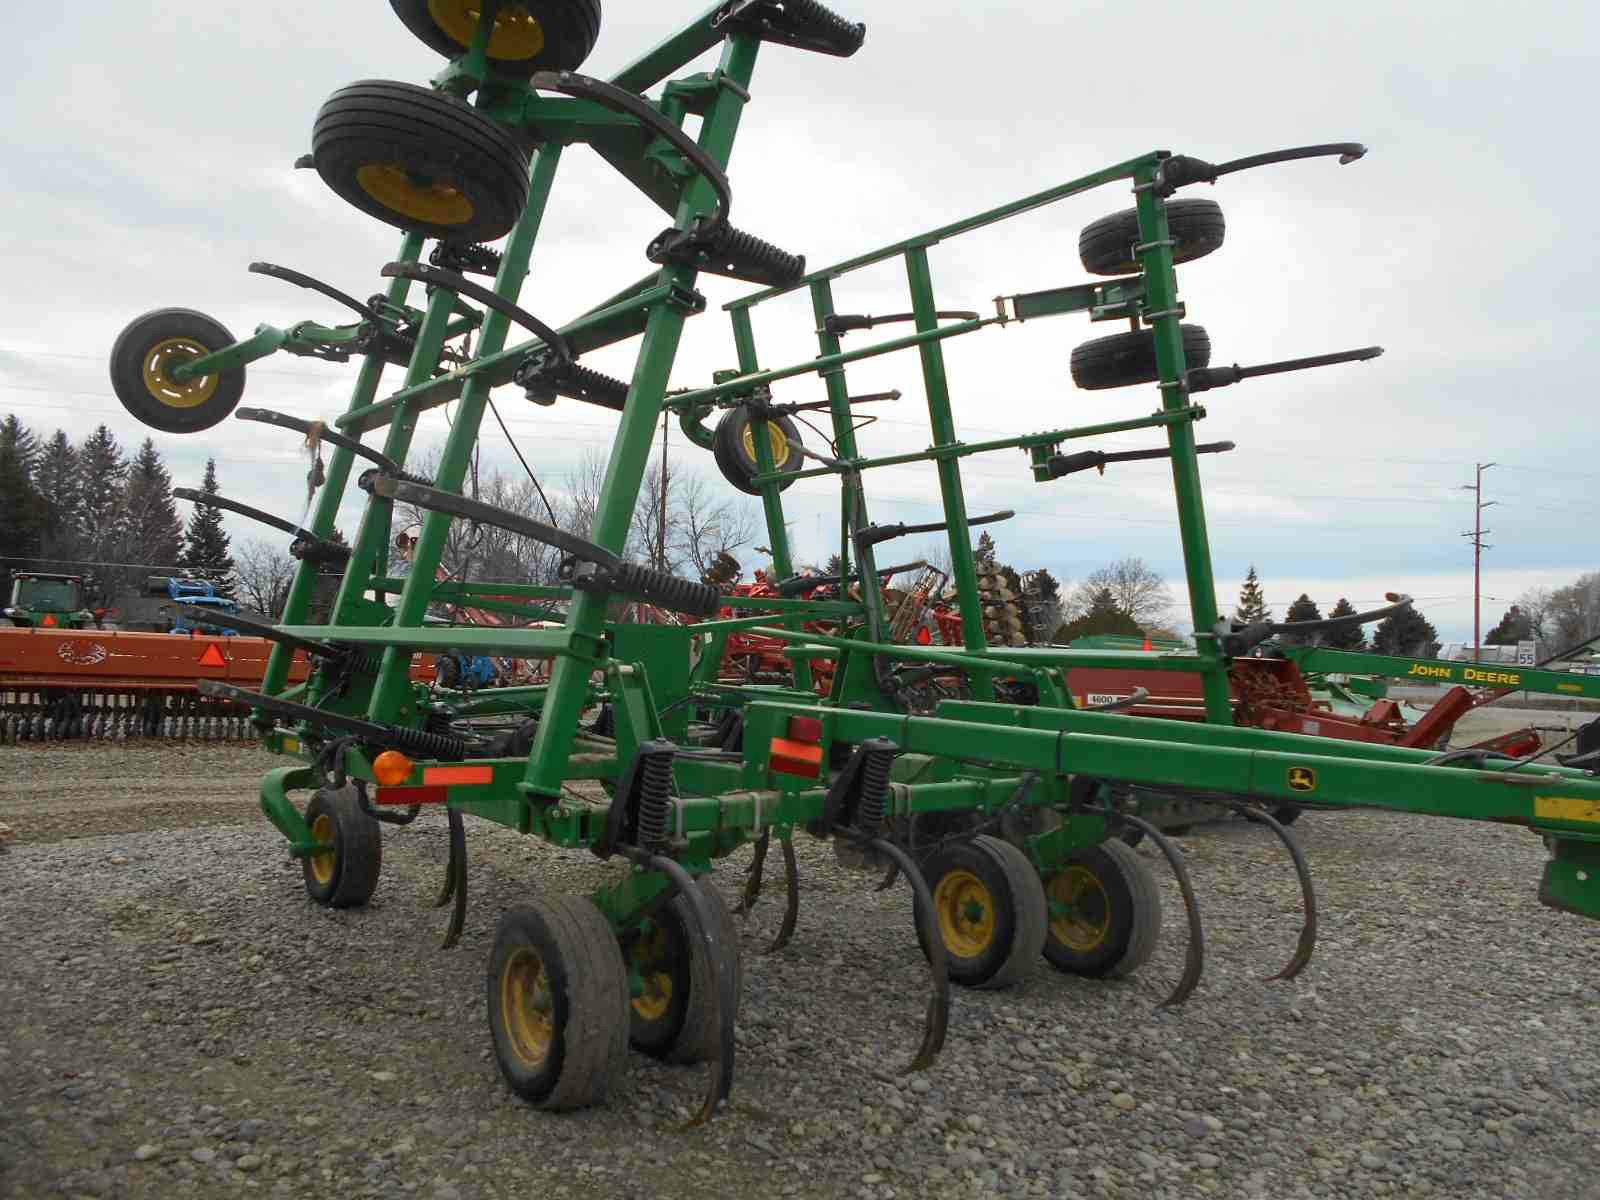 These new Rippers are Awesome! 1//64 Ertl John Deere 2730 Combination Ripper